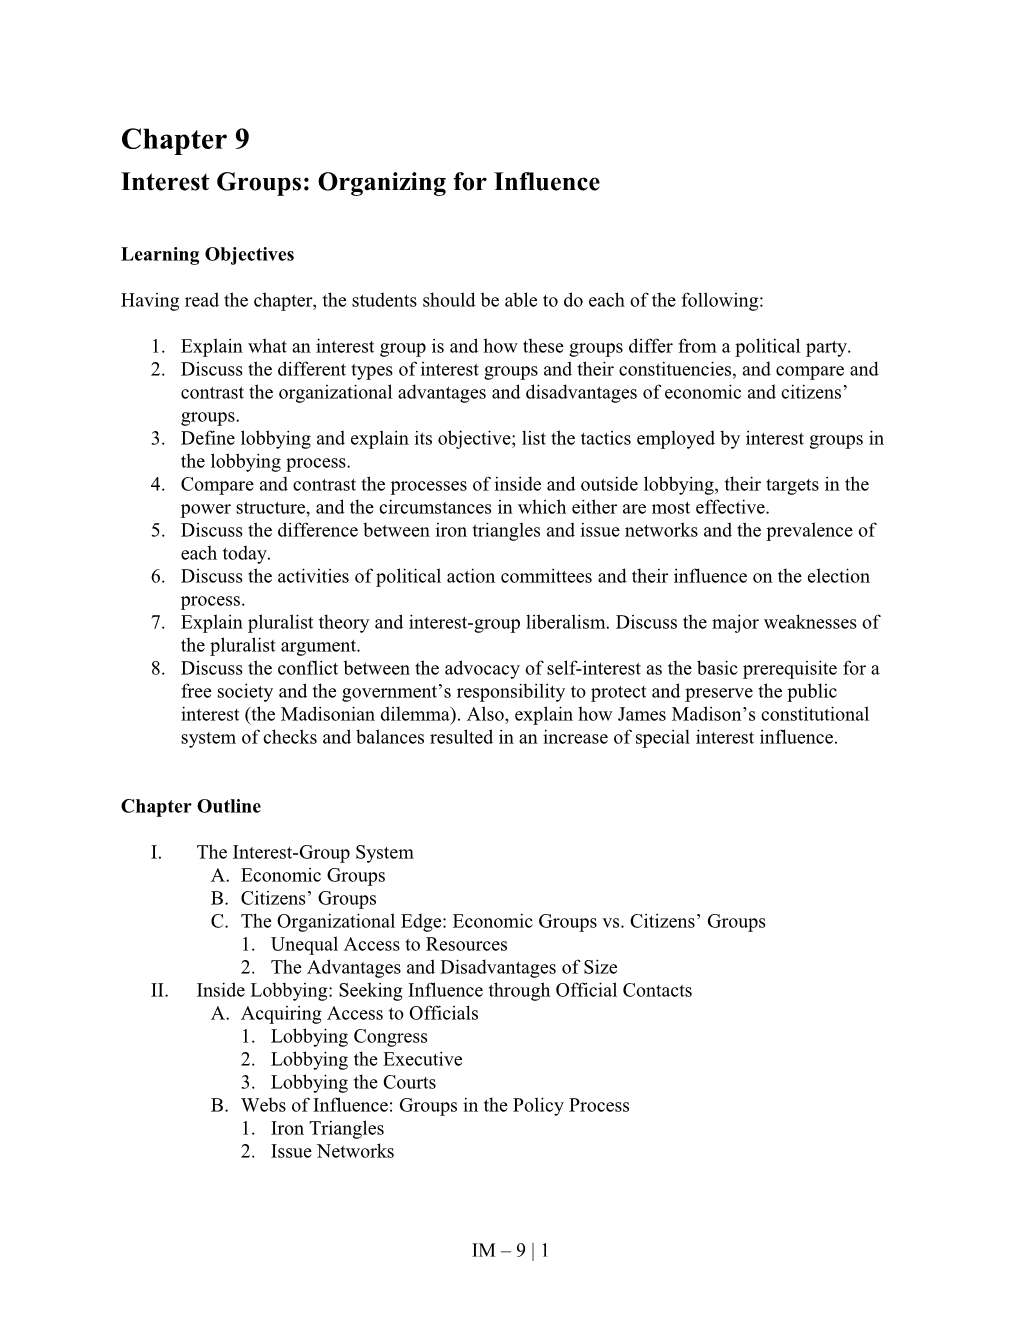 Interest Groups: Organizing for Influence